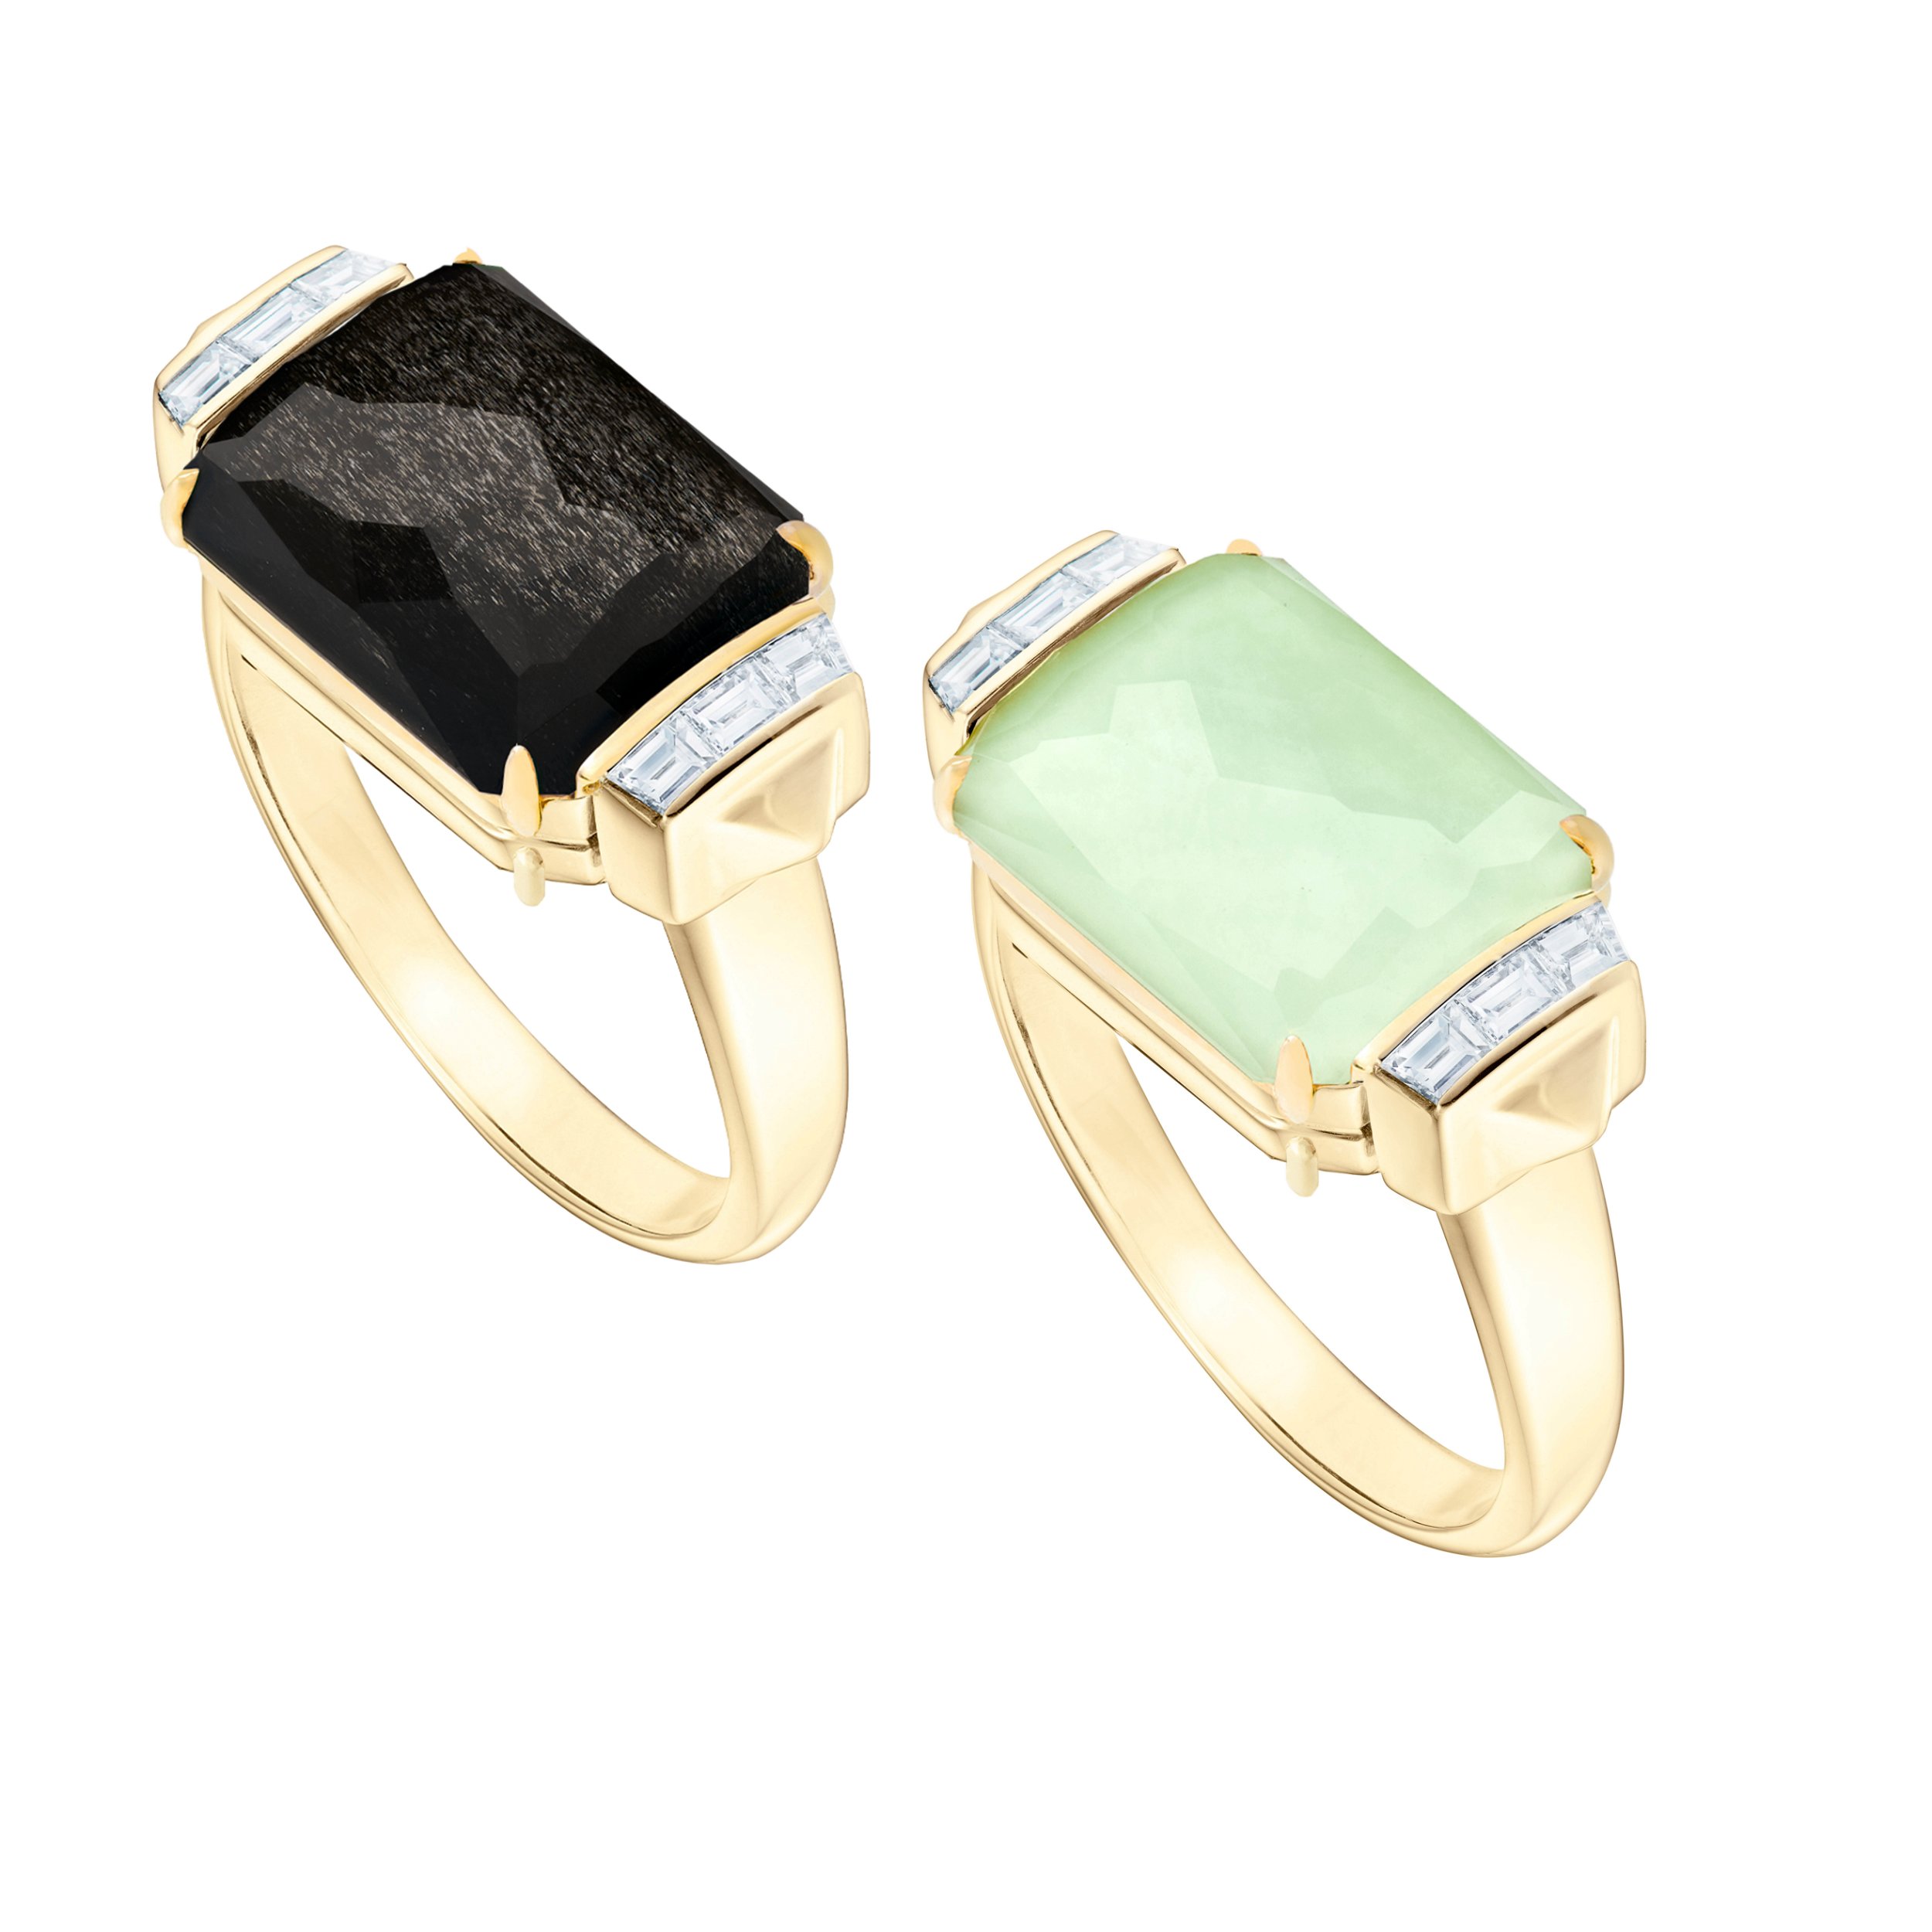 CH2 Tablet Twister Slim Ring with Chrysolemon, Silver Obsidian and White Diamonds in 18kt Yellow Gold - Size 7